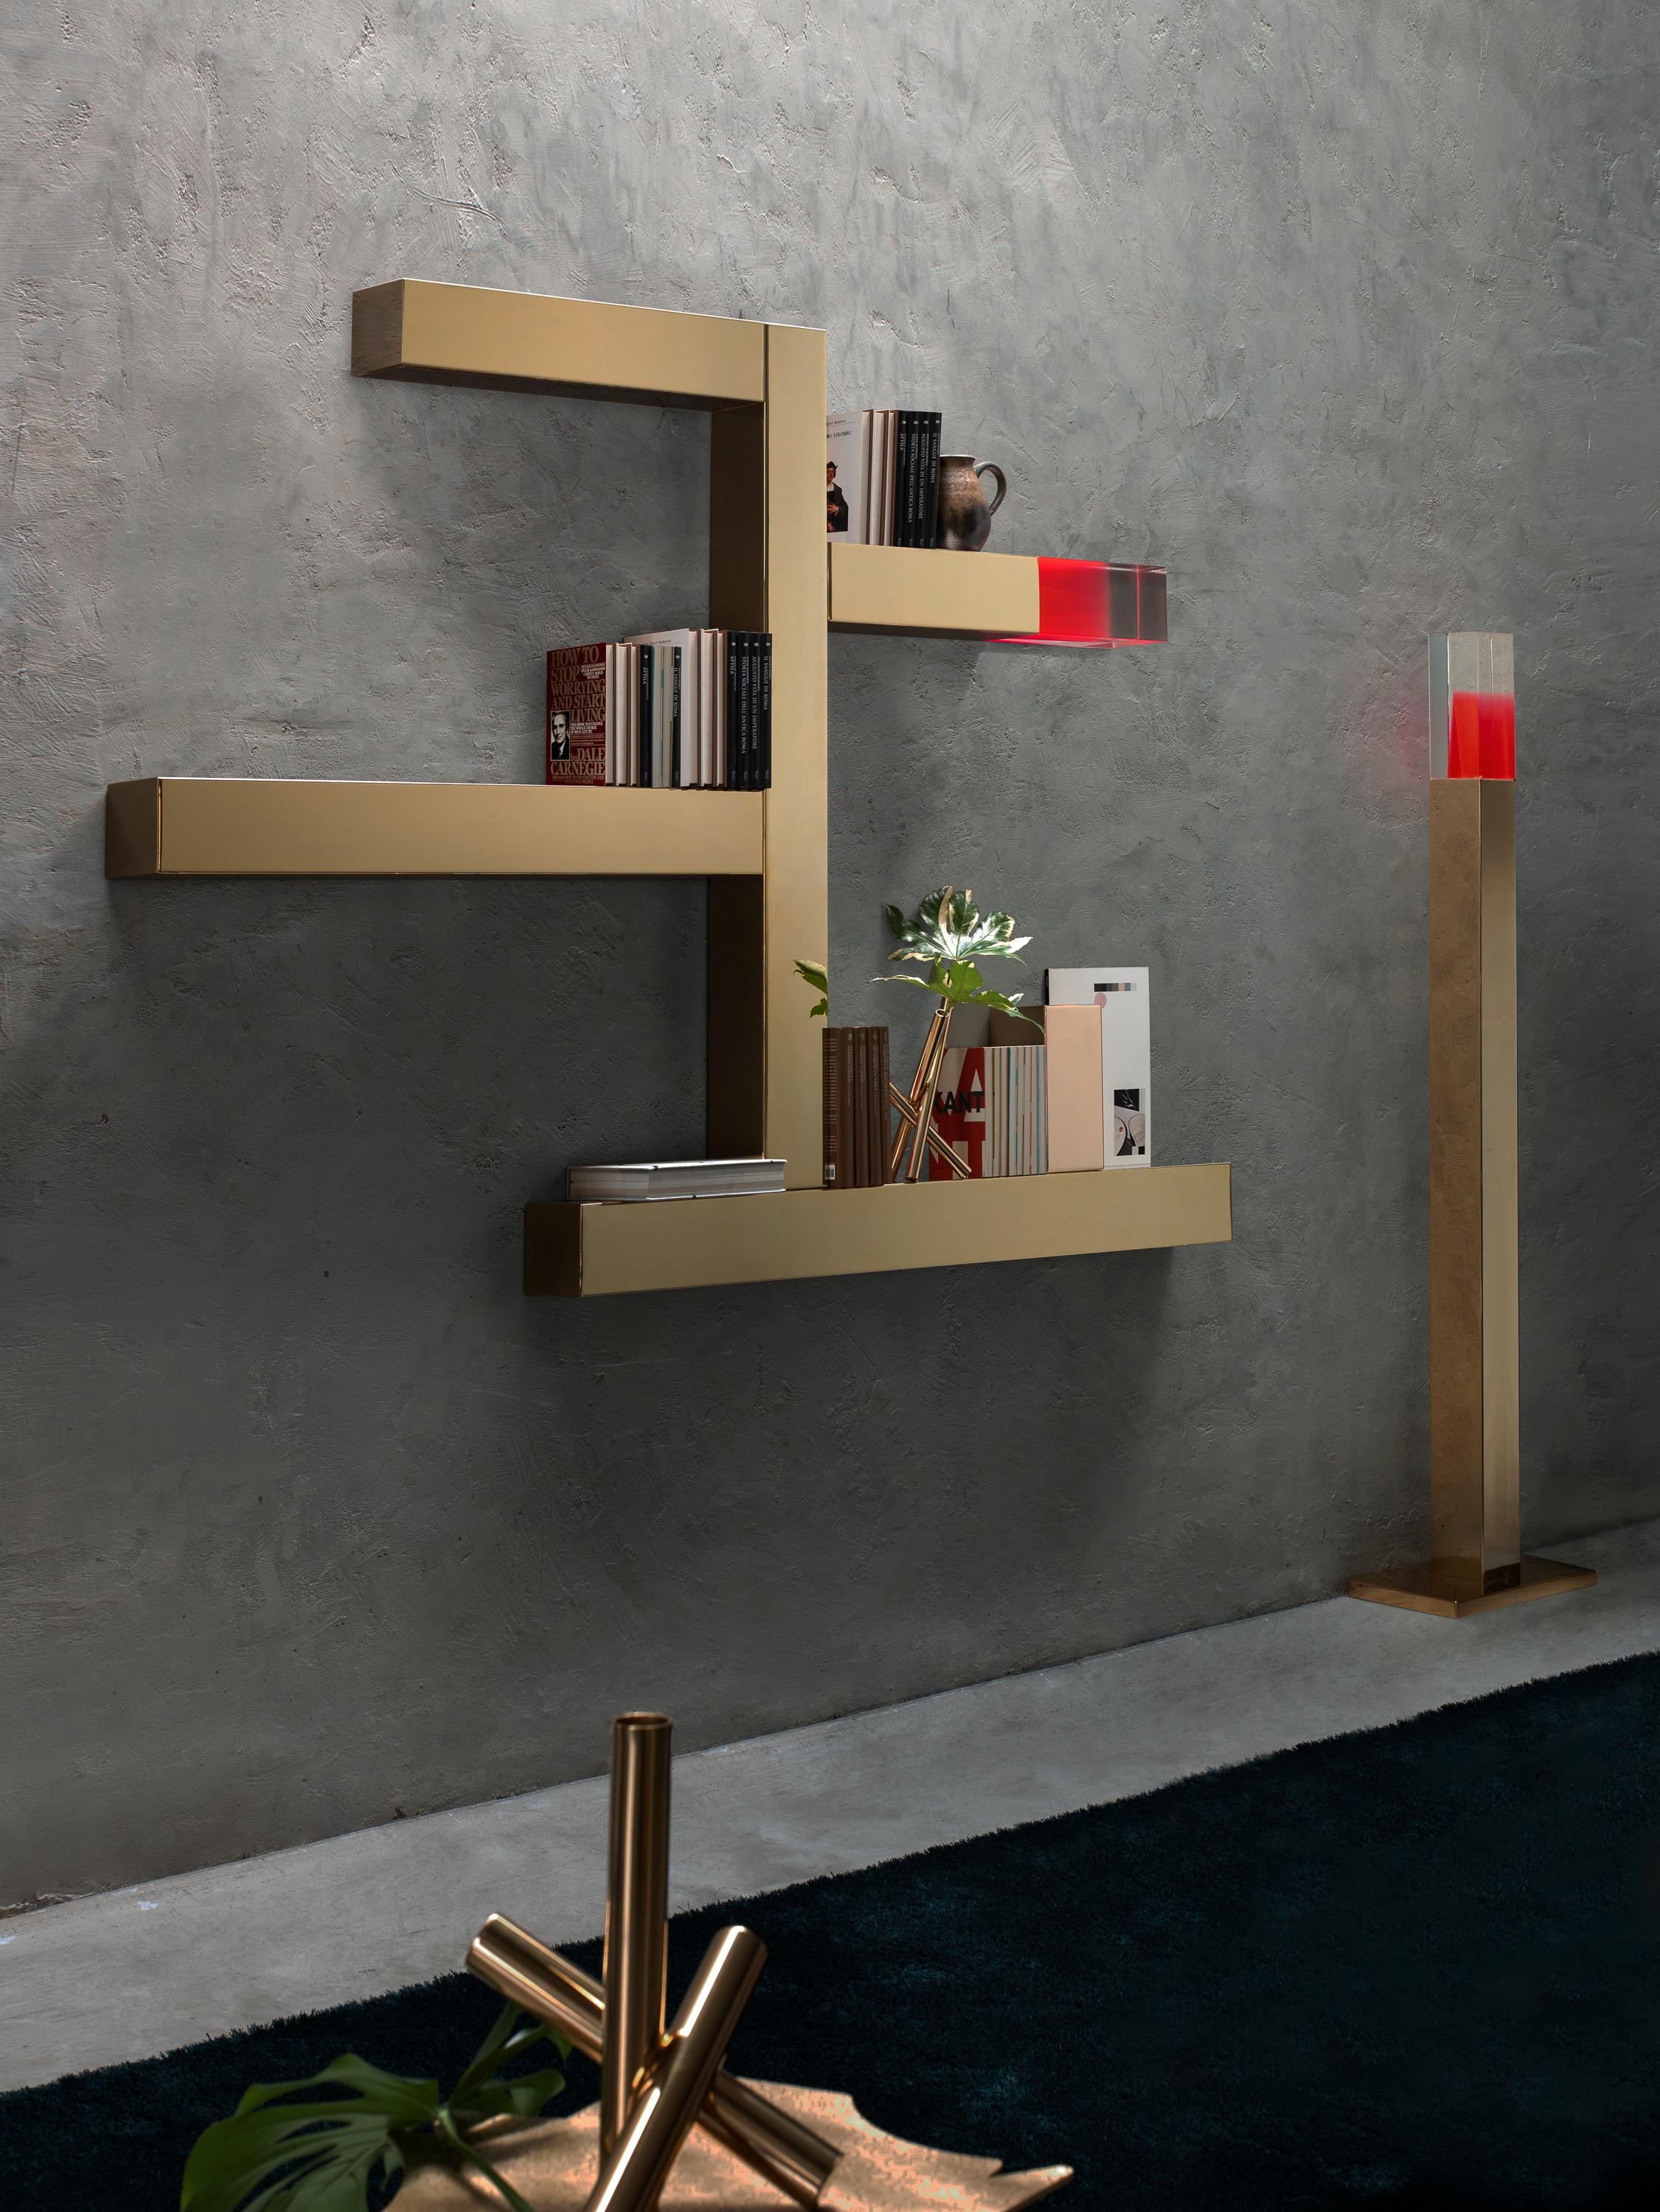 Ghidini 1961 Incrocio Shelves in Stainless Steel and Plexiglass by Andrea Branzi For Sale 1